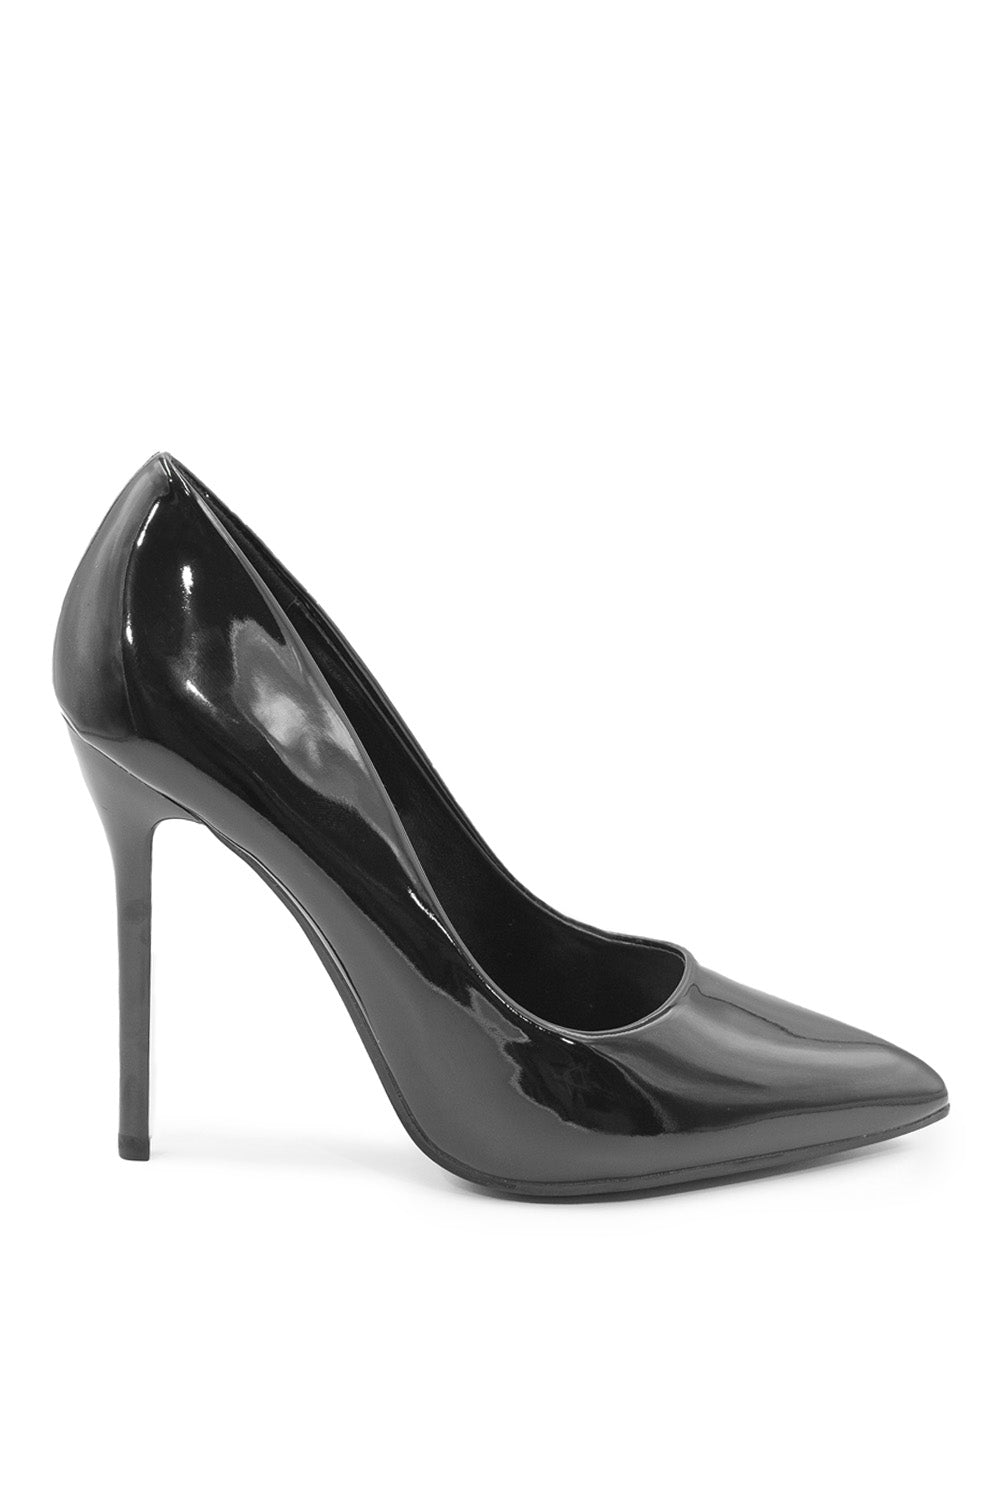 KYRA HIGH HEEL STILETTO PUMPS IN BLACK PATENT FAUX LEATHER